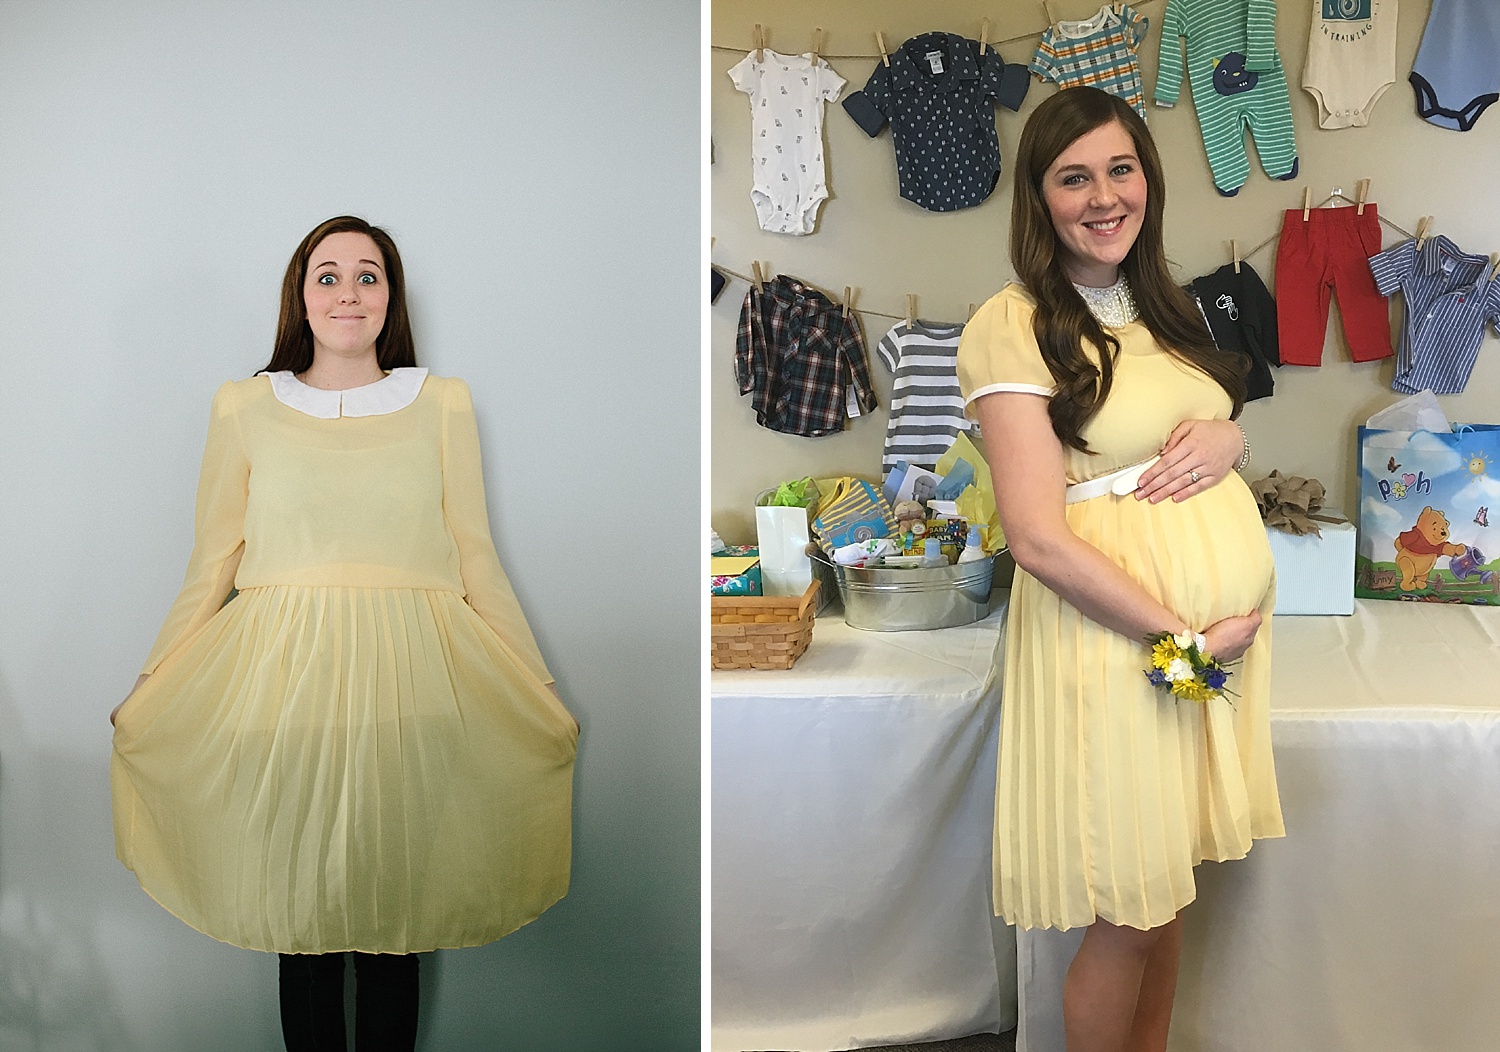 Full Size of Baby Shower:petite Maternity Dresses For Baby Shower Forever 21 Maternity Celebrity Baby Shower Dresses Inexpensive Maternity Clothes Mom And Dad Baby Shower Outfits Used Maternity Clothes Cute Inexpensive Maternity Clothes Baby Shower Dresses For Winter